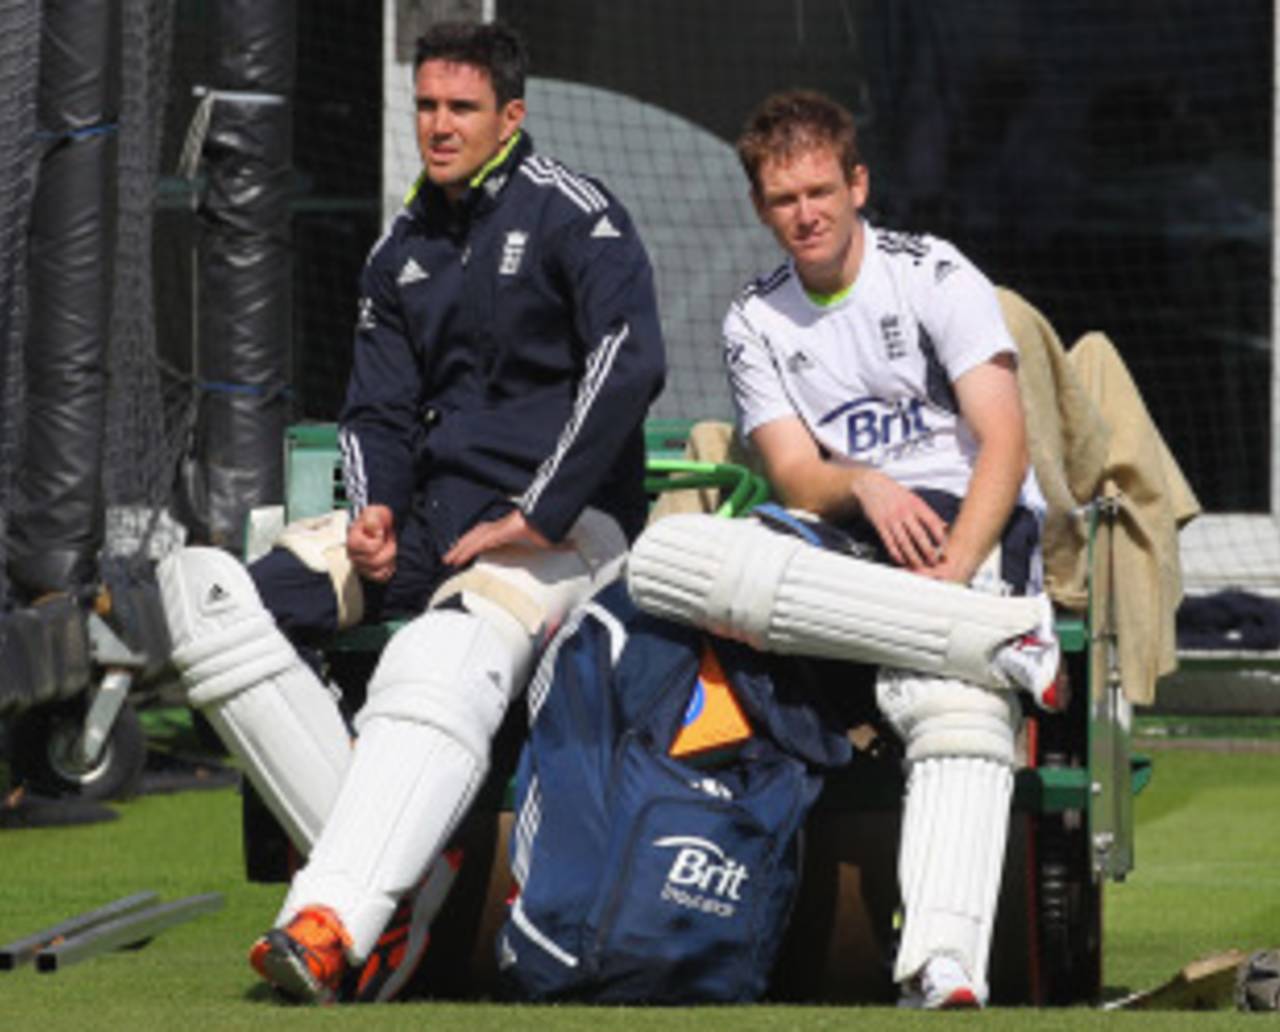 Kevin Pietersen and Eoin Morgan are both in need of runs after struggling in the third Test&nbsp;&nbsp;&bull;&nbsp;&nbsp;Getty Images